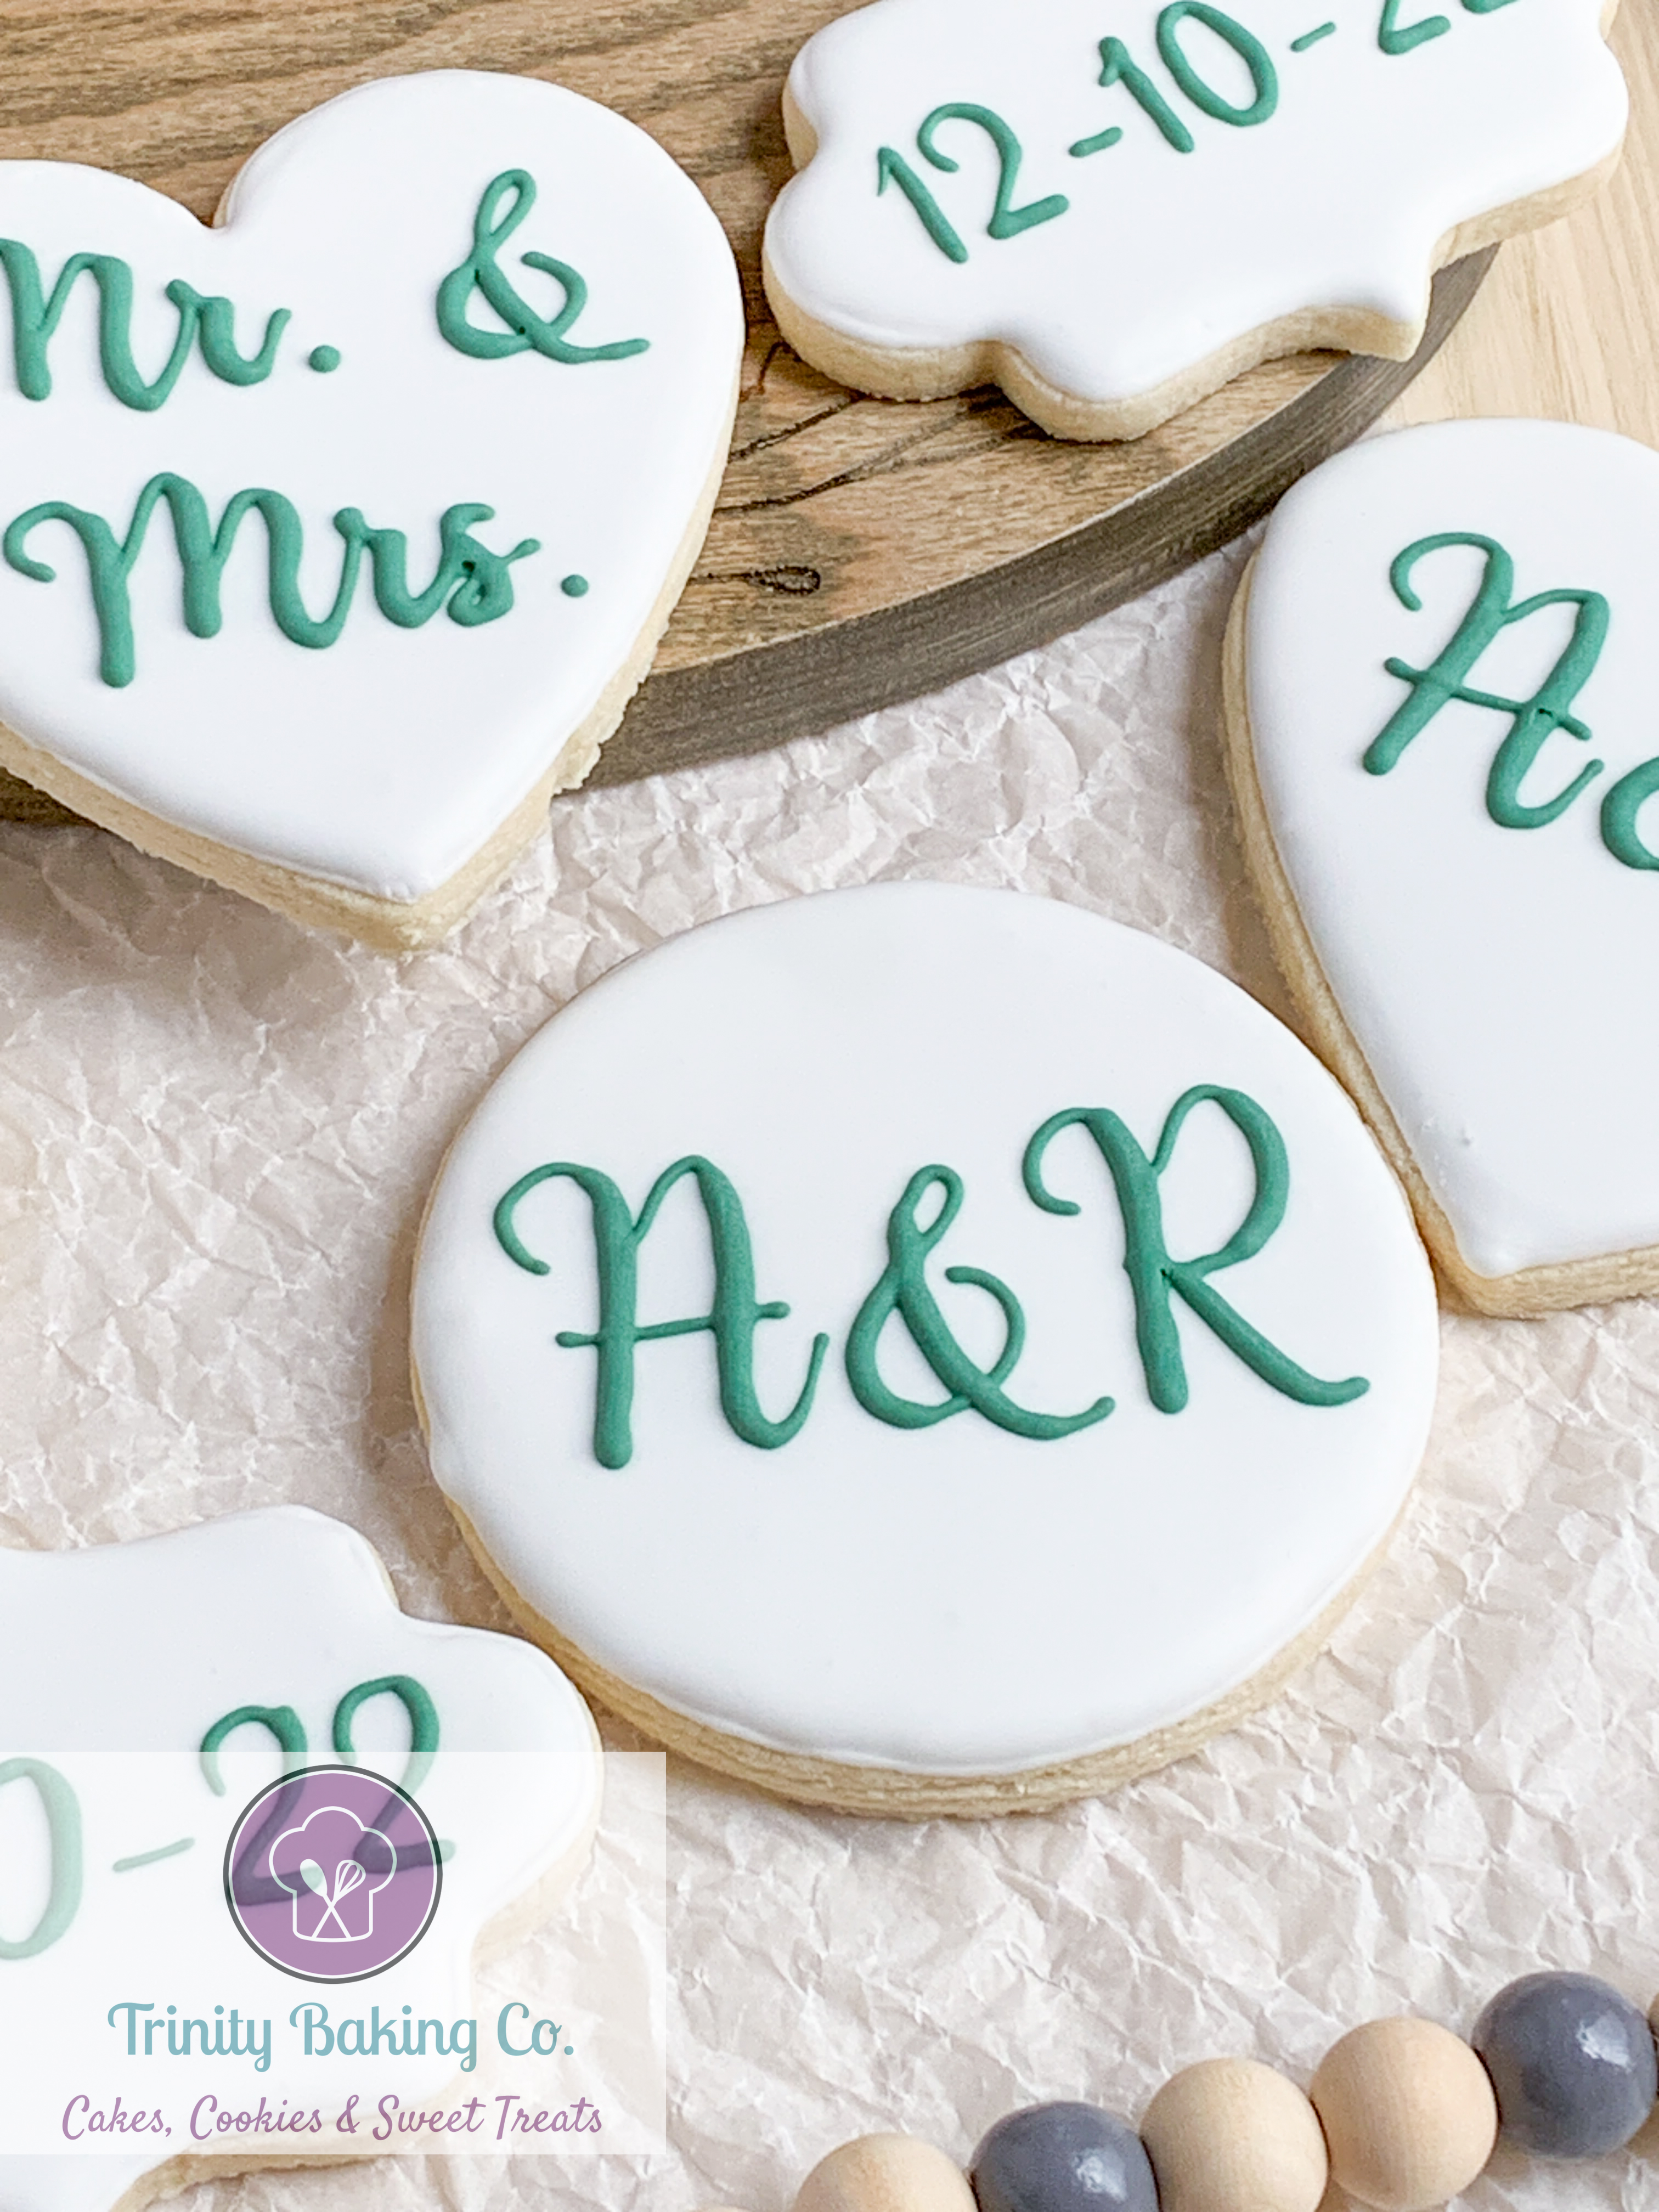 4. Detailed Decorated Sugar Cookies